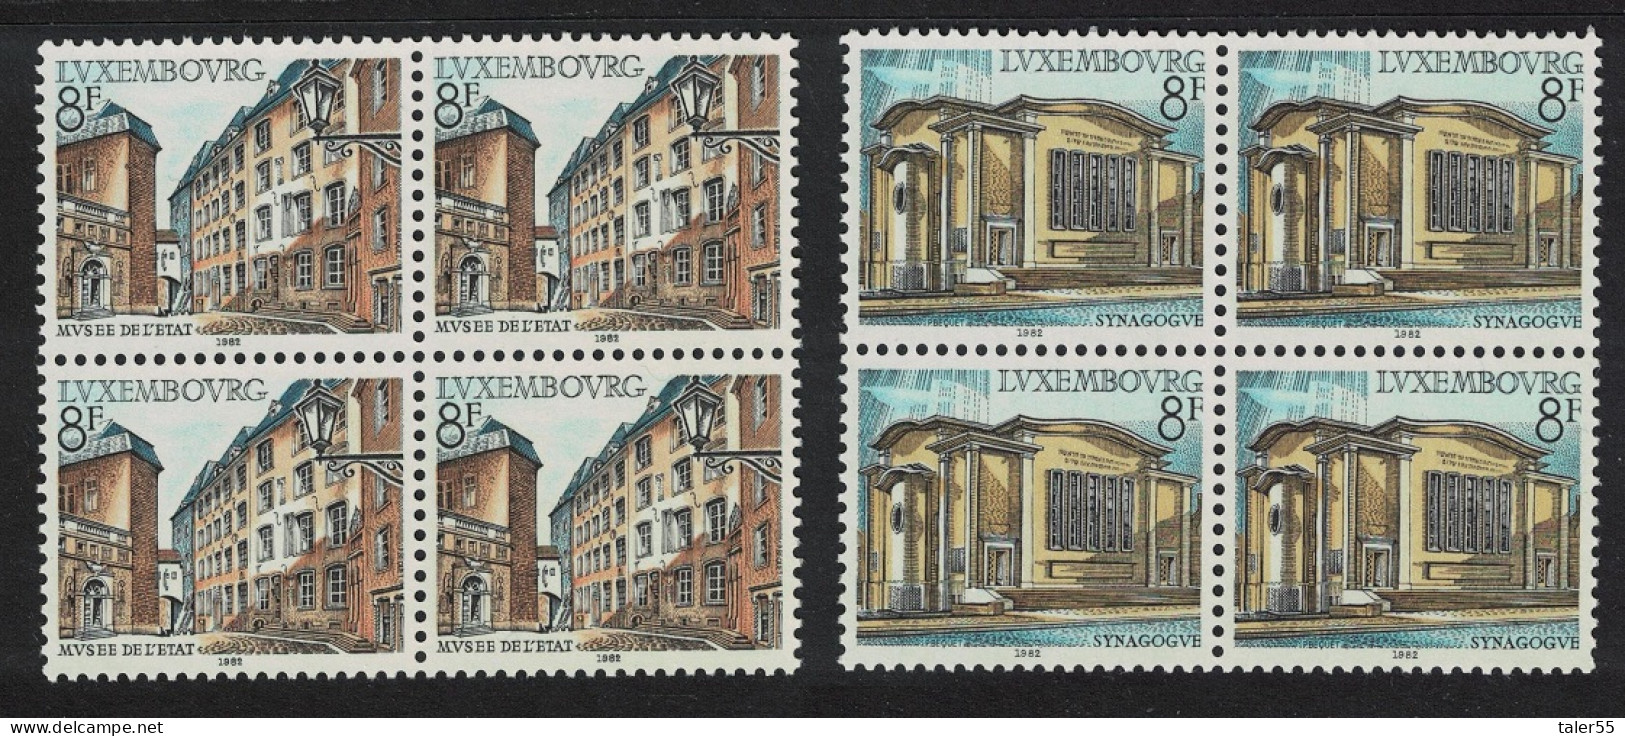 Luxembourg Synagogue State Museum 2v Blocks Of 4 1982 MNH SG#1090-1091 - Ungebraucht